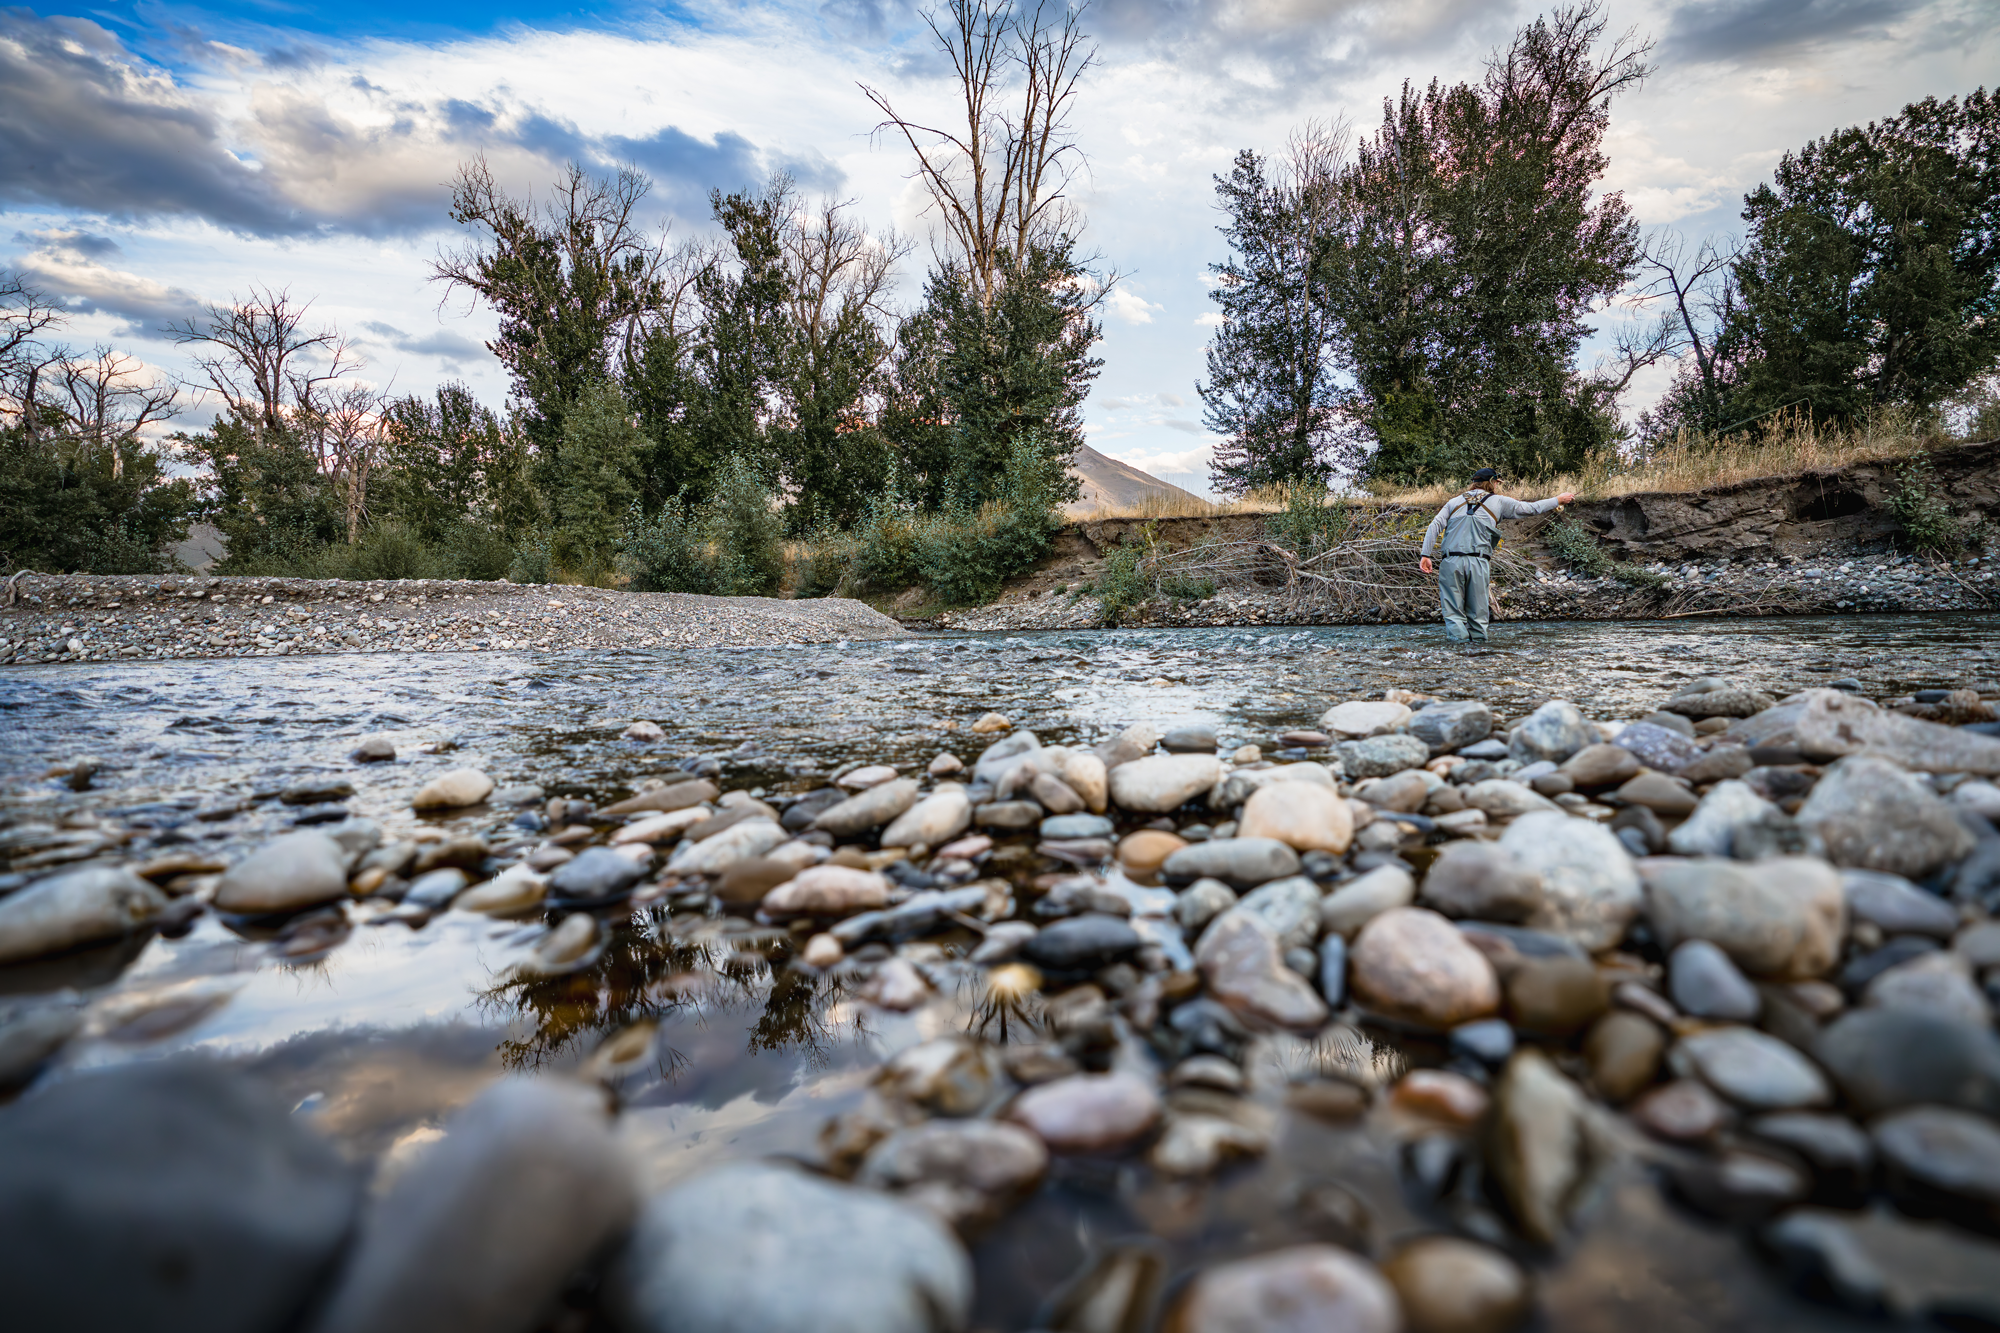 Angler on the river with rocks in the foreground. Photo by James Conrad